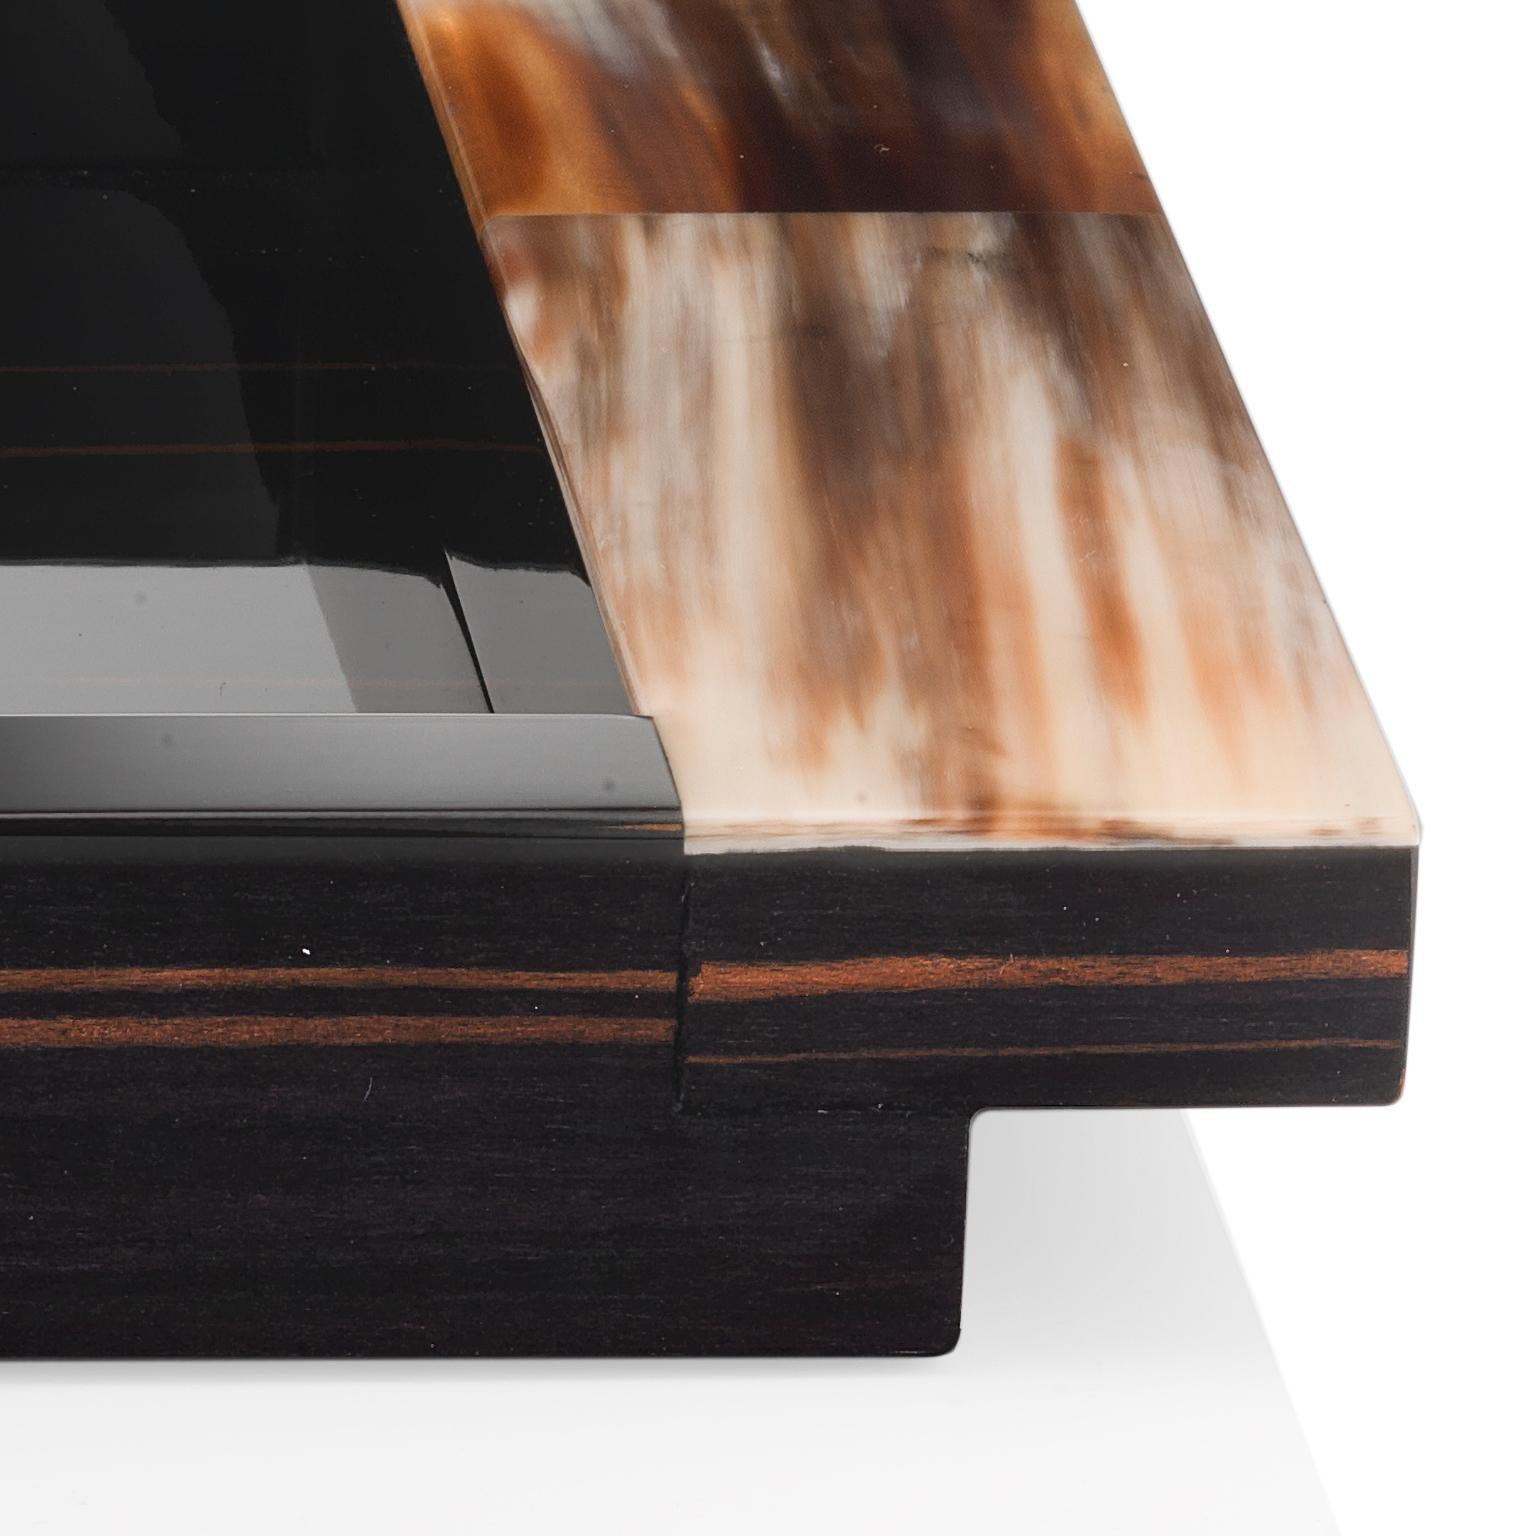 Exquisite craftsmanship and fine materials make Elia tray a sophisticated addition to any demanding decor. Featuring a rectangular wooden structure in glossy ebony, the design is distinguished by elegant handles in Corno Italiano adding a striking